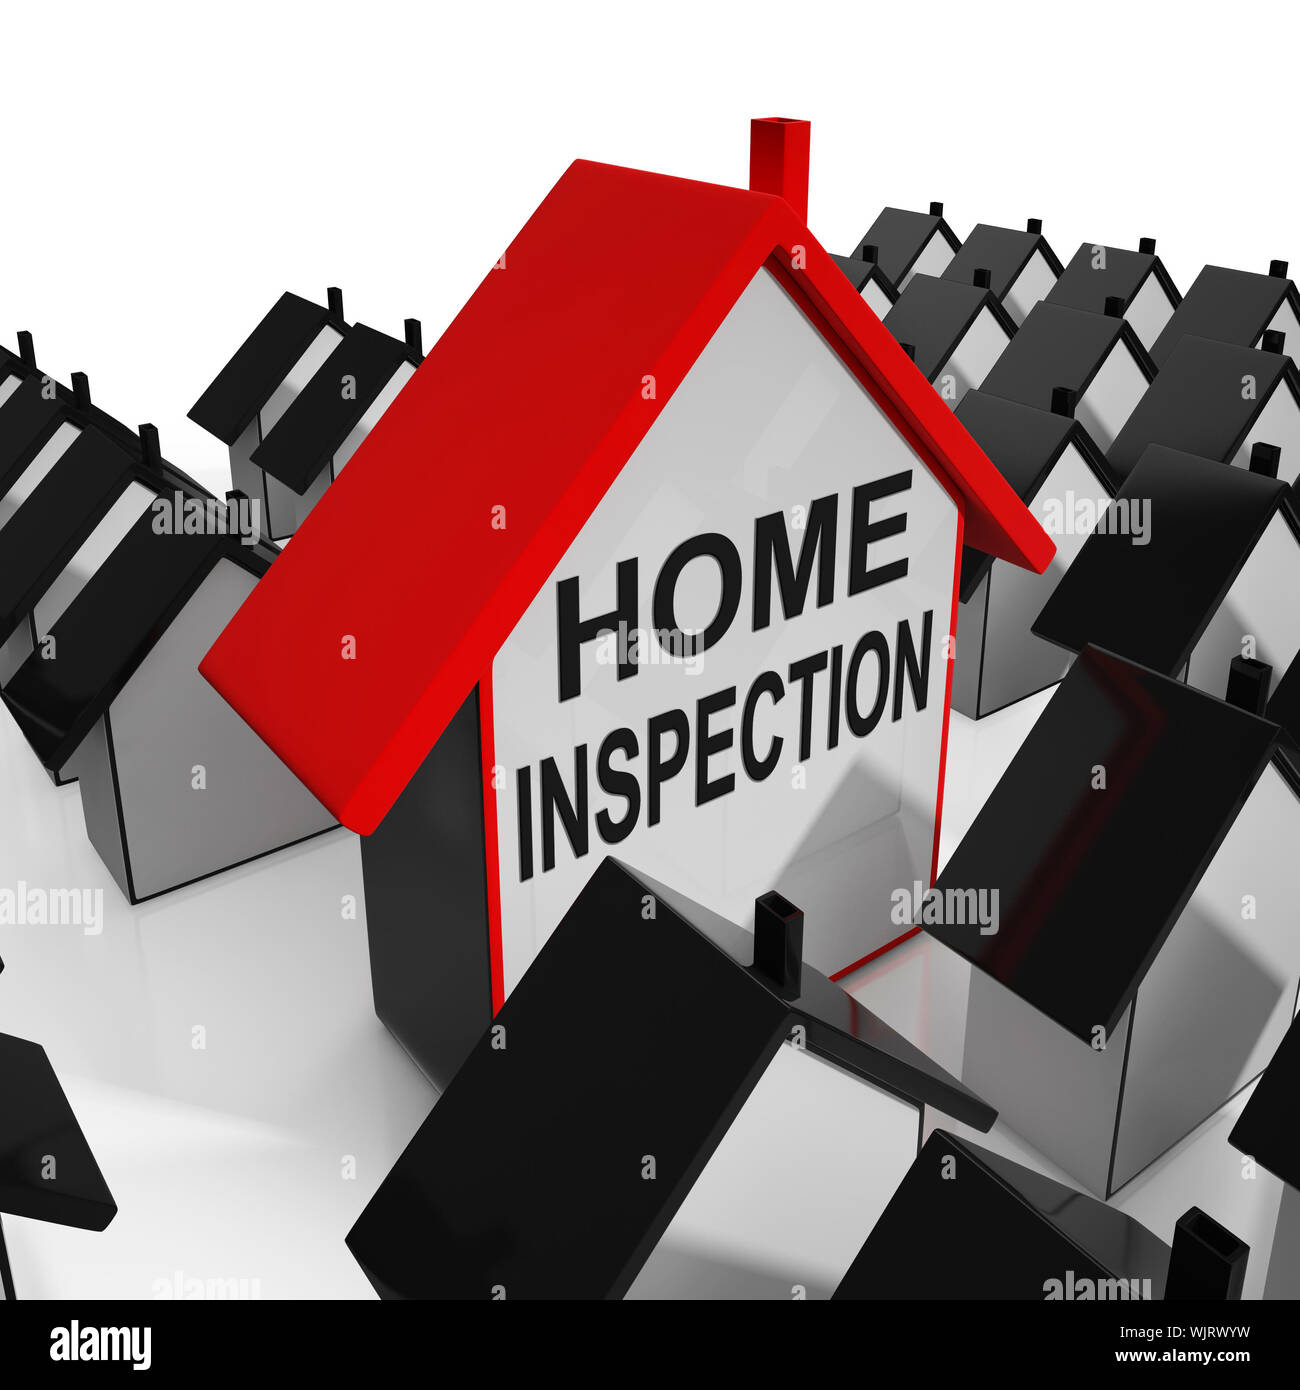 Home Inspection House Meaning Review And Scrutinize Property Stock Photo